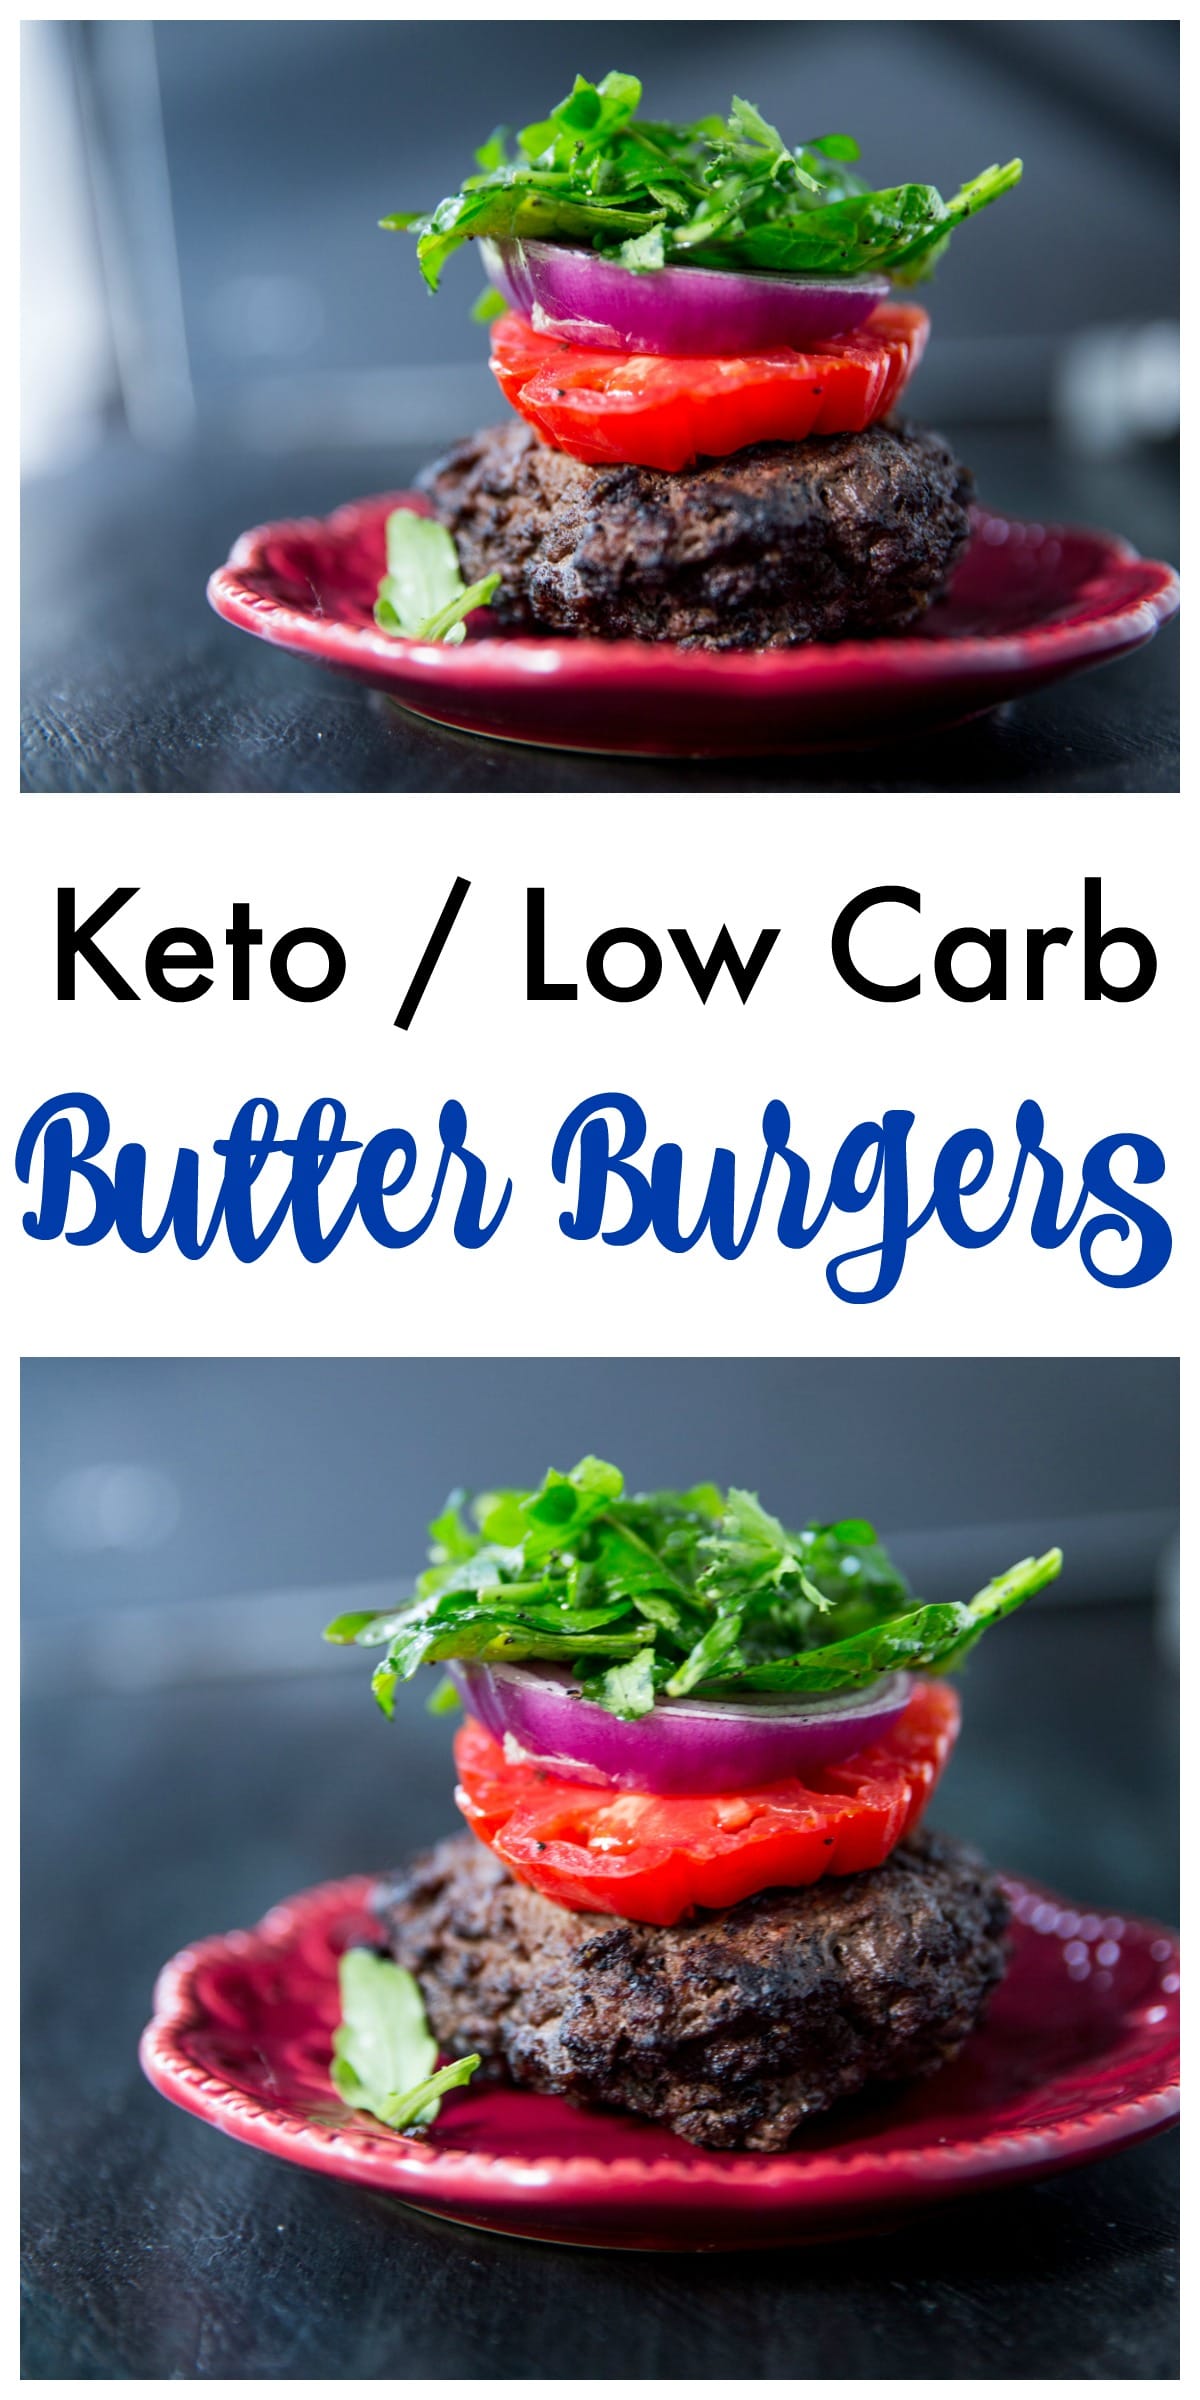 Check out our favorite Keto Butter Burger Recipe for a new spin on a classic. This seasoned delicious grilled burger recipe is going to be a favorite!